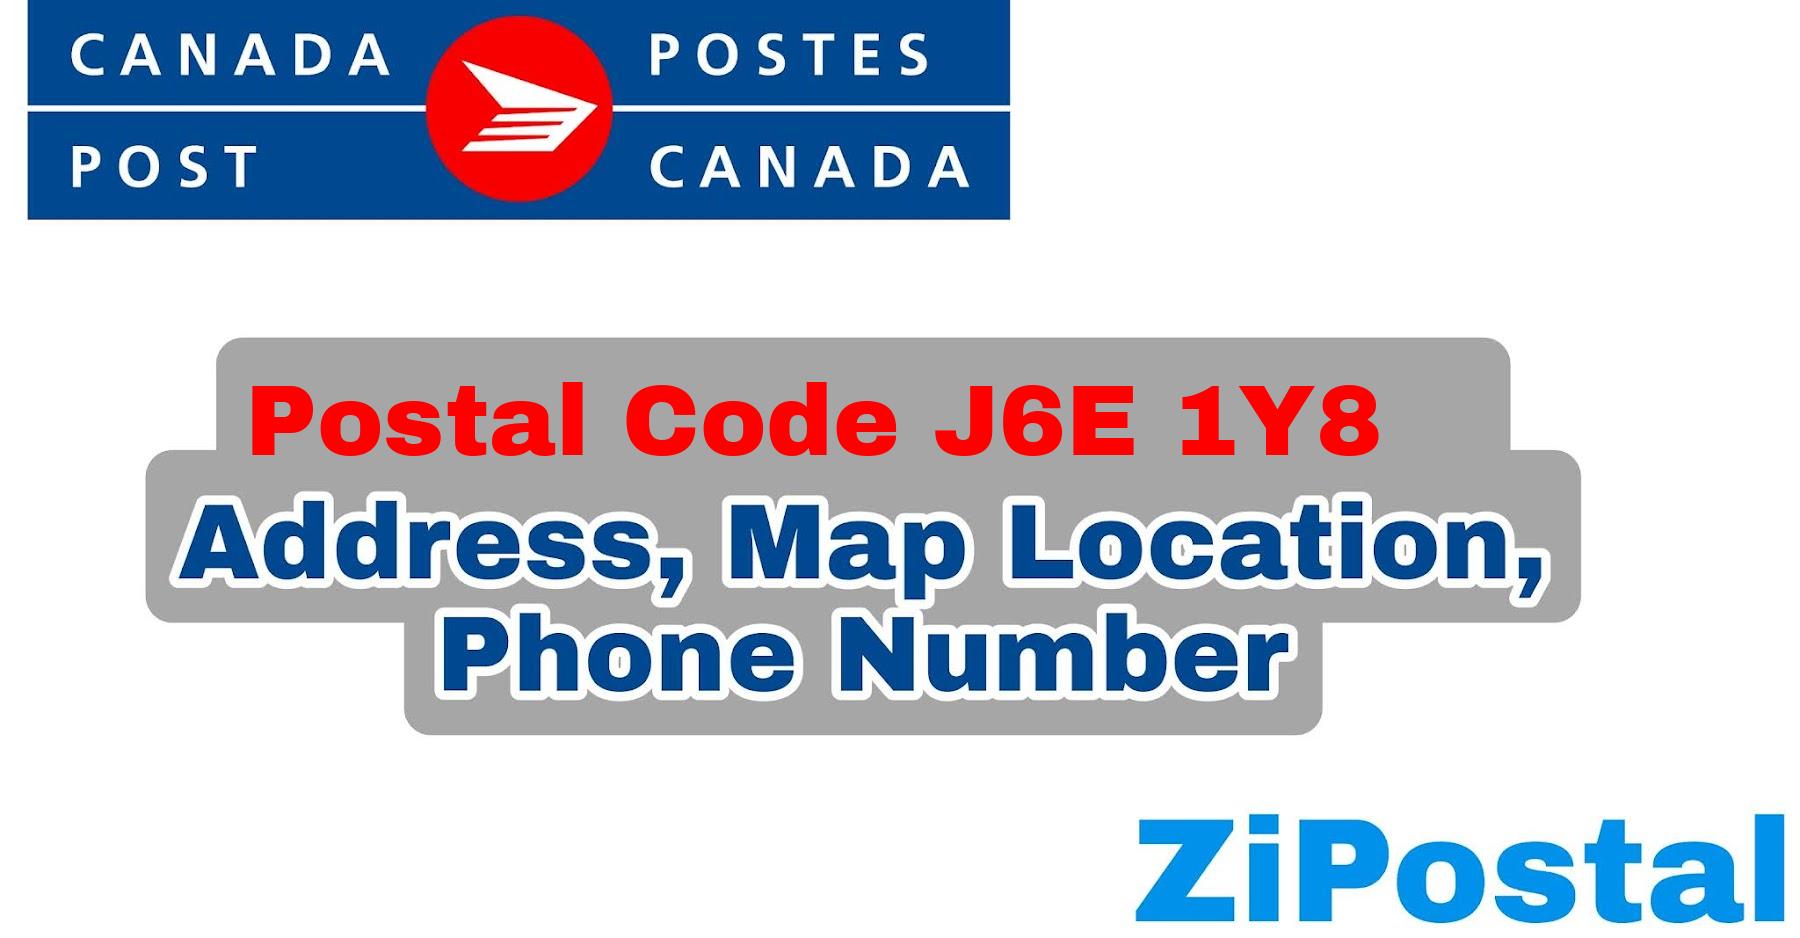 Postal Code J6E 1Y8 Address Map Location and Phone Number